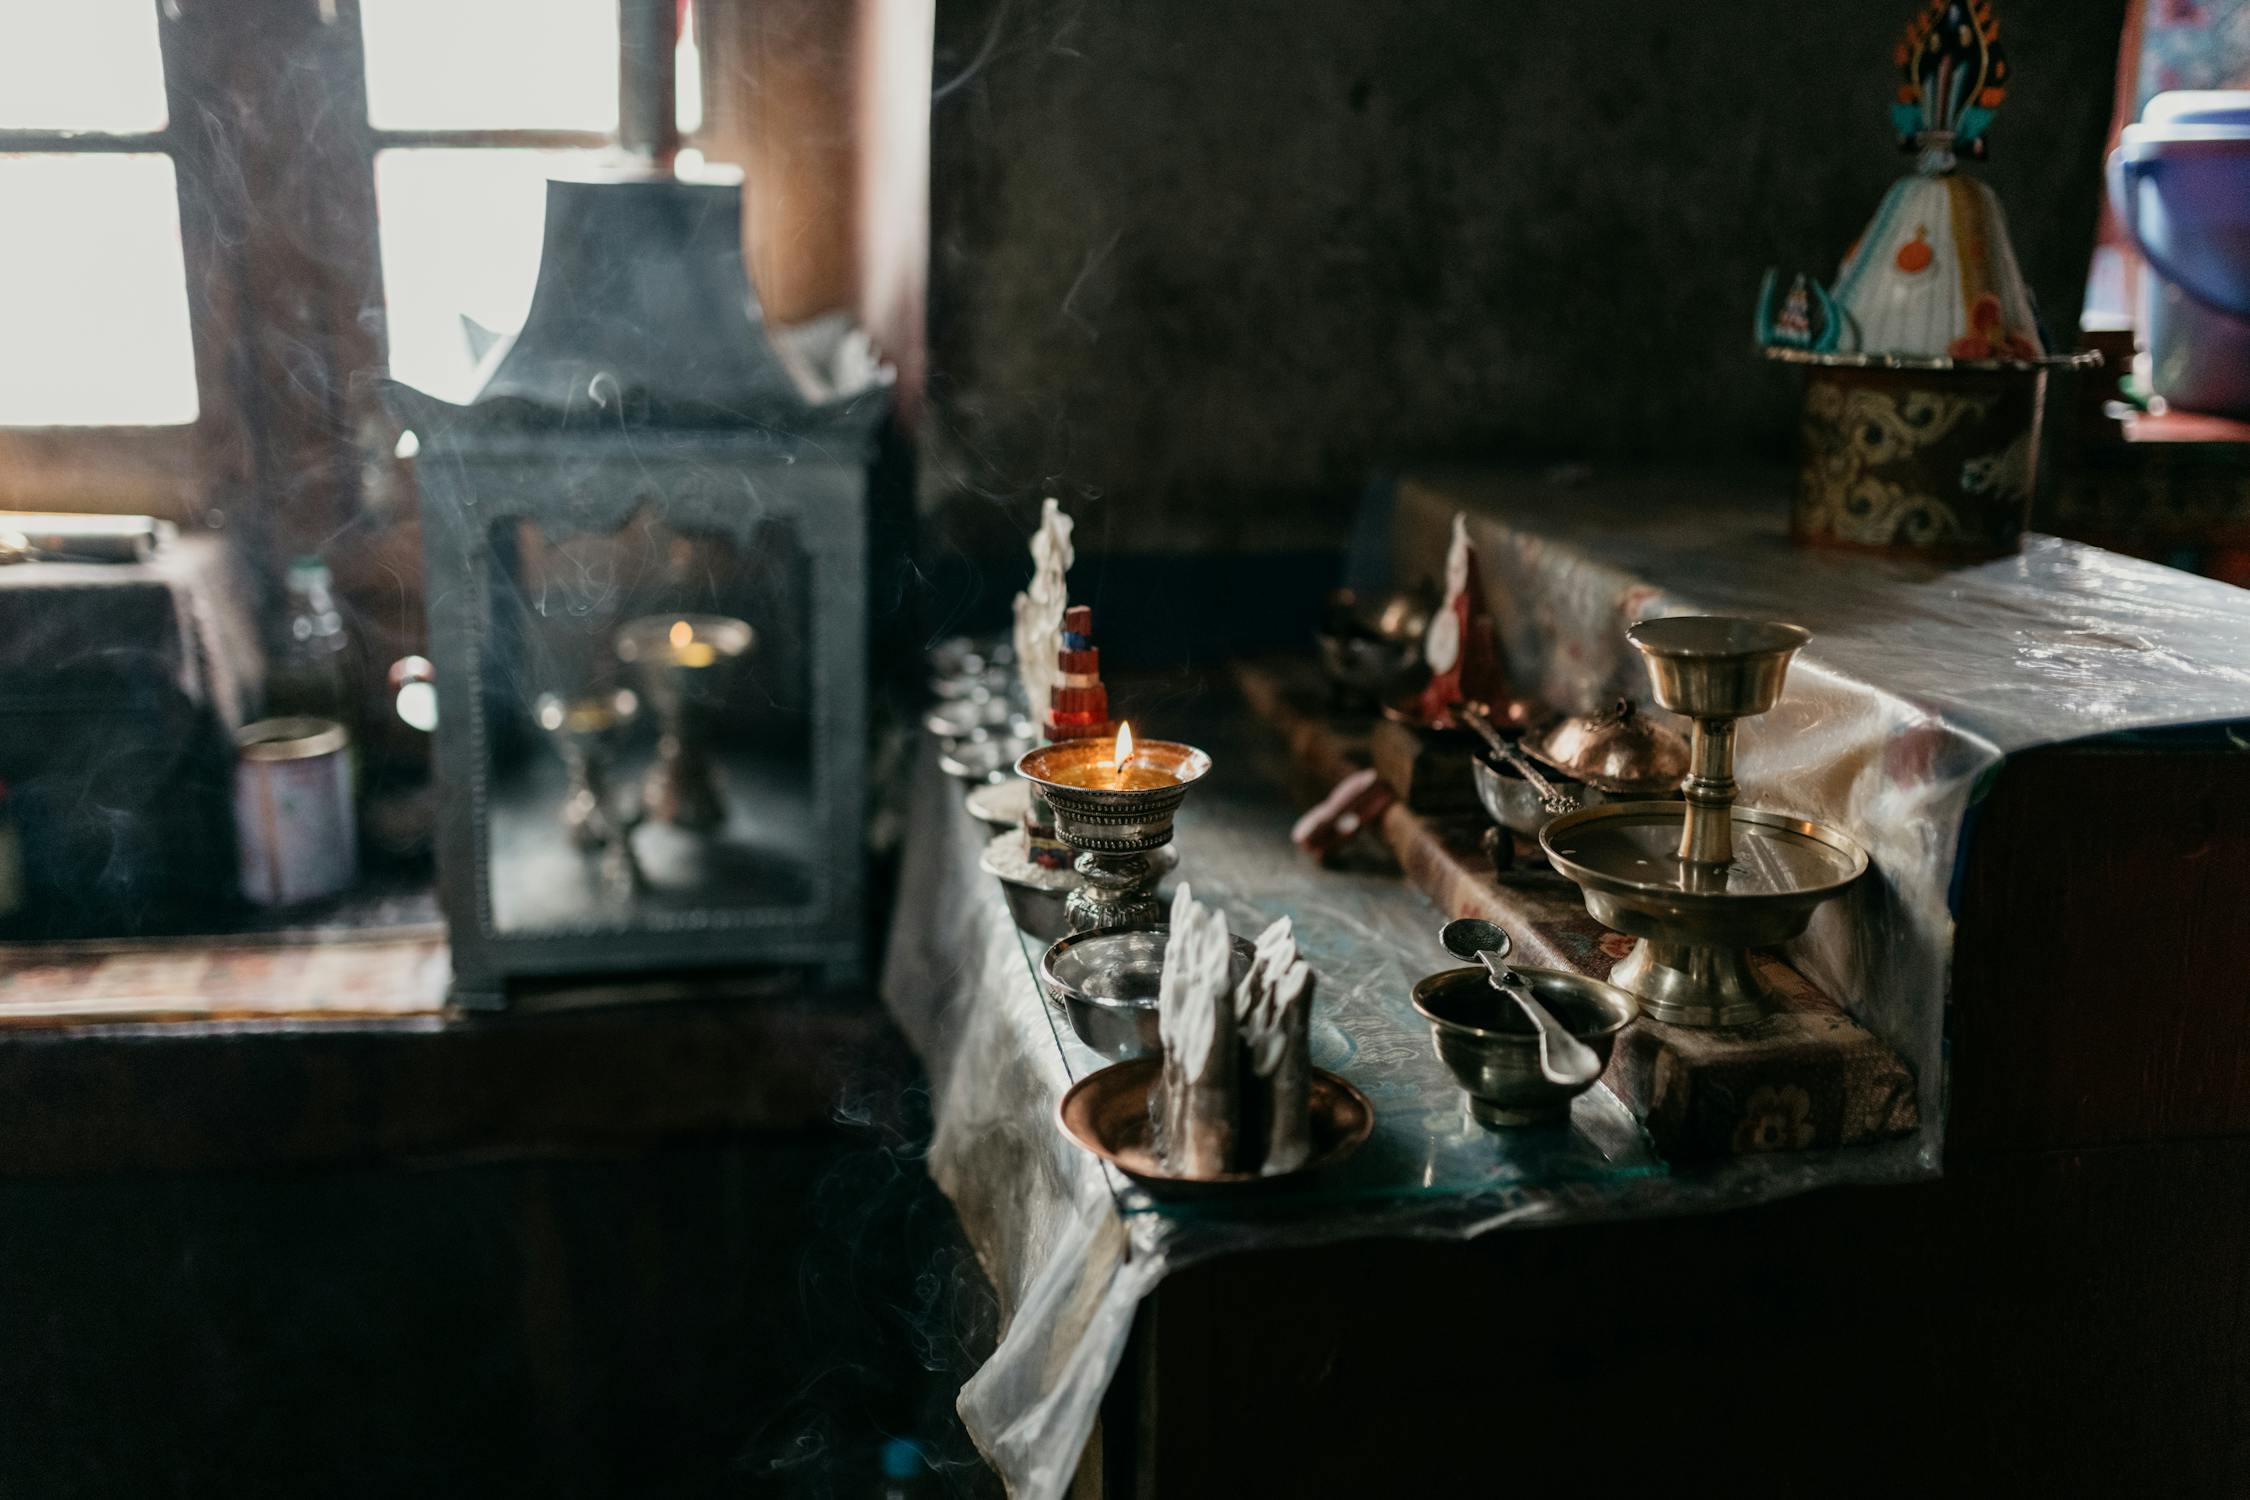 Holy Fire Photo by Julia Volk from Pexels: https://www.pexels.com/photo/traditional-buddhist-bowls-and-burning-candle-in-church-5202305/